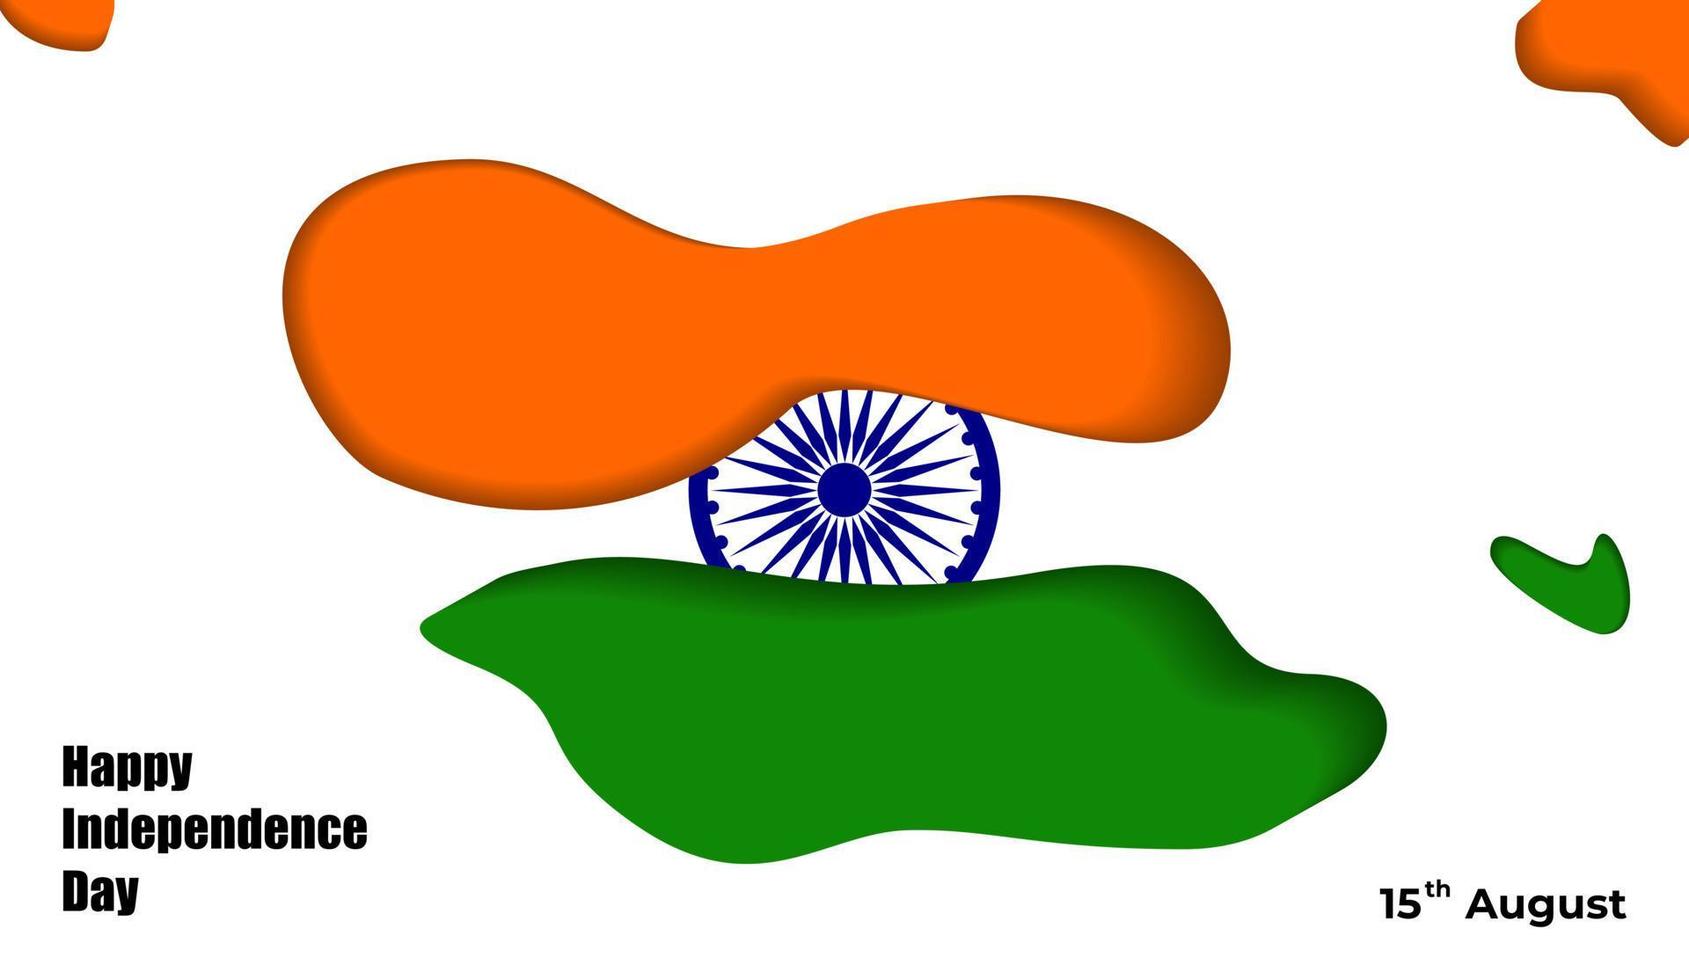 Happy Independence Day of India, India independence day. vector illustration with color flag